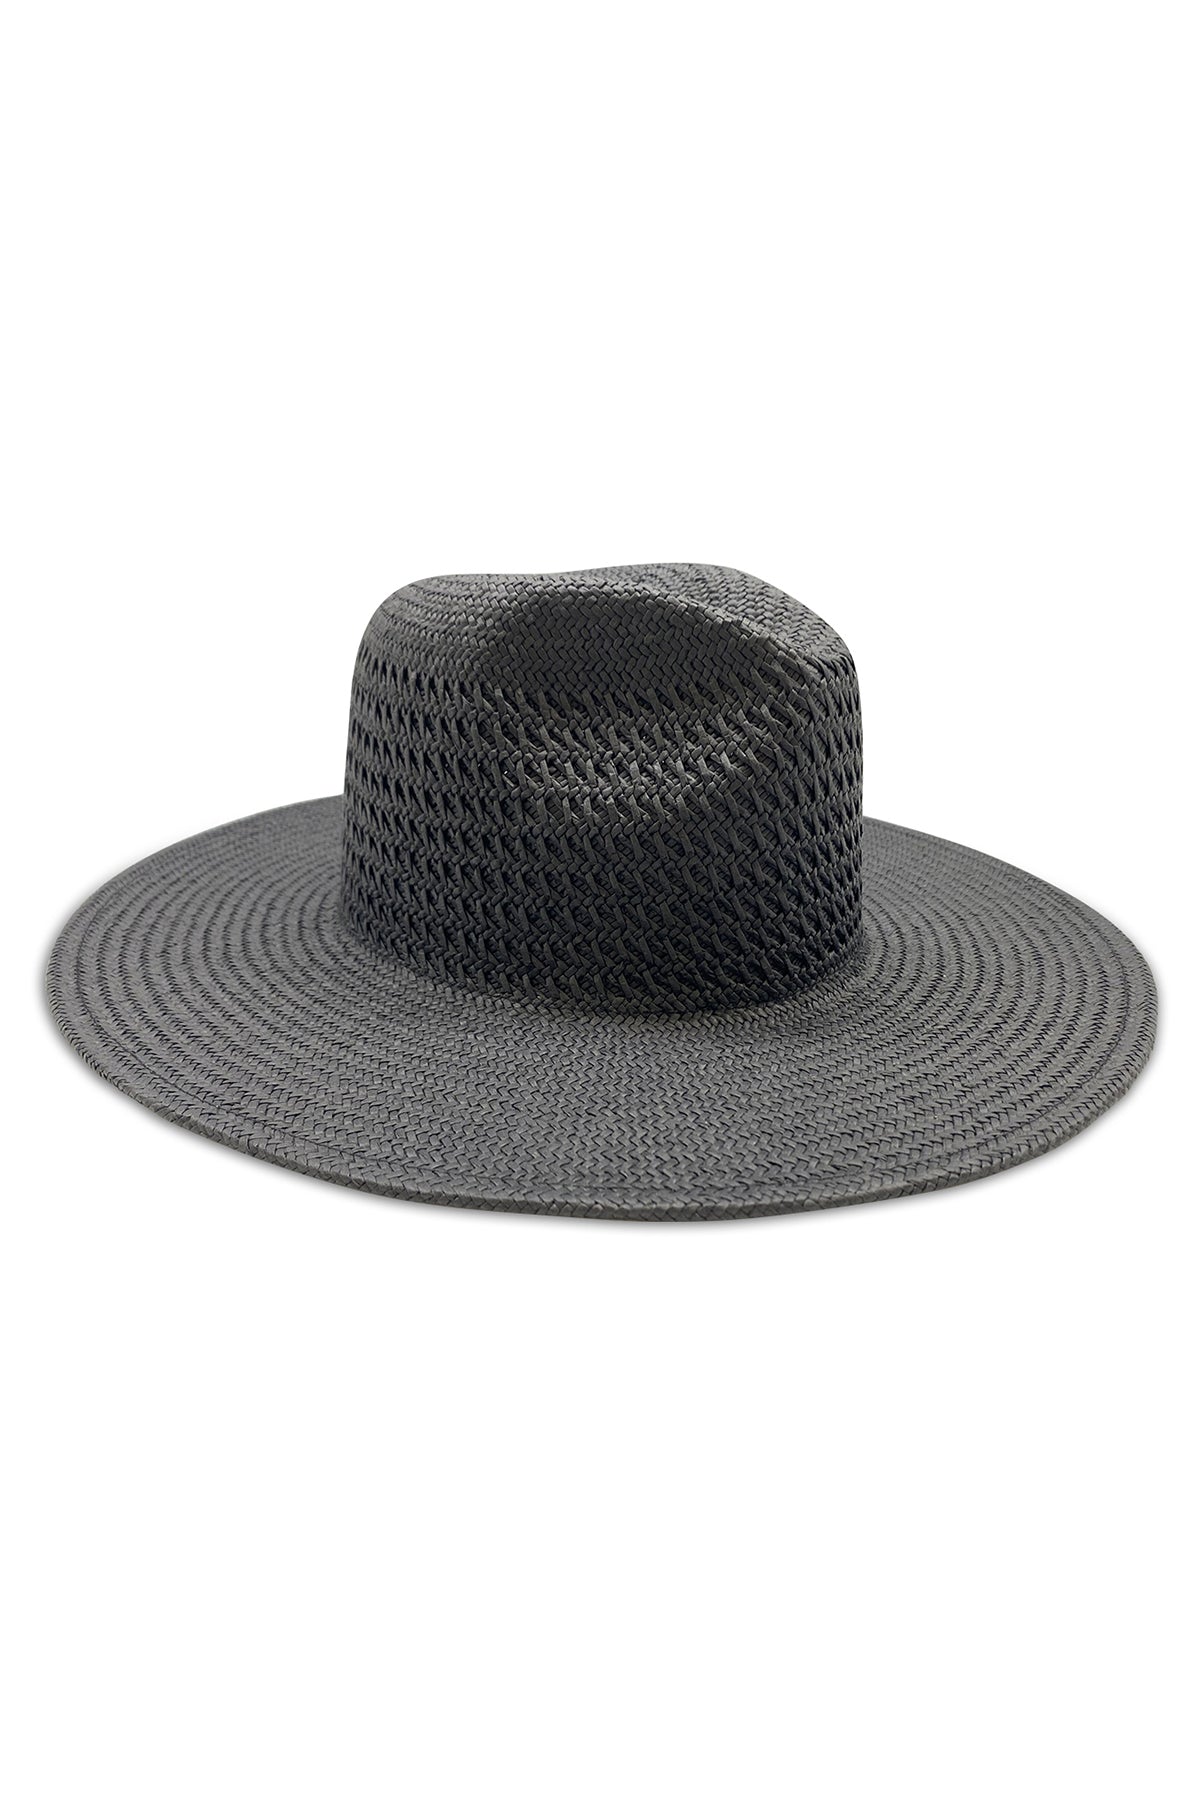 Vented Luxe Packable Hat Black-24285361373377